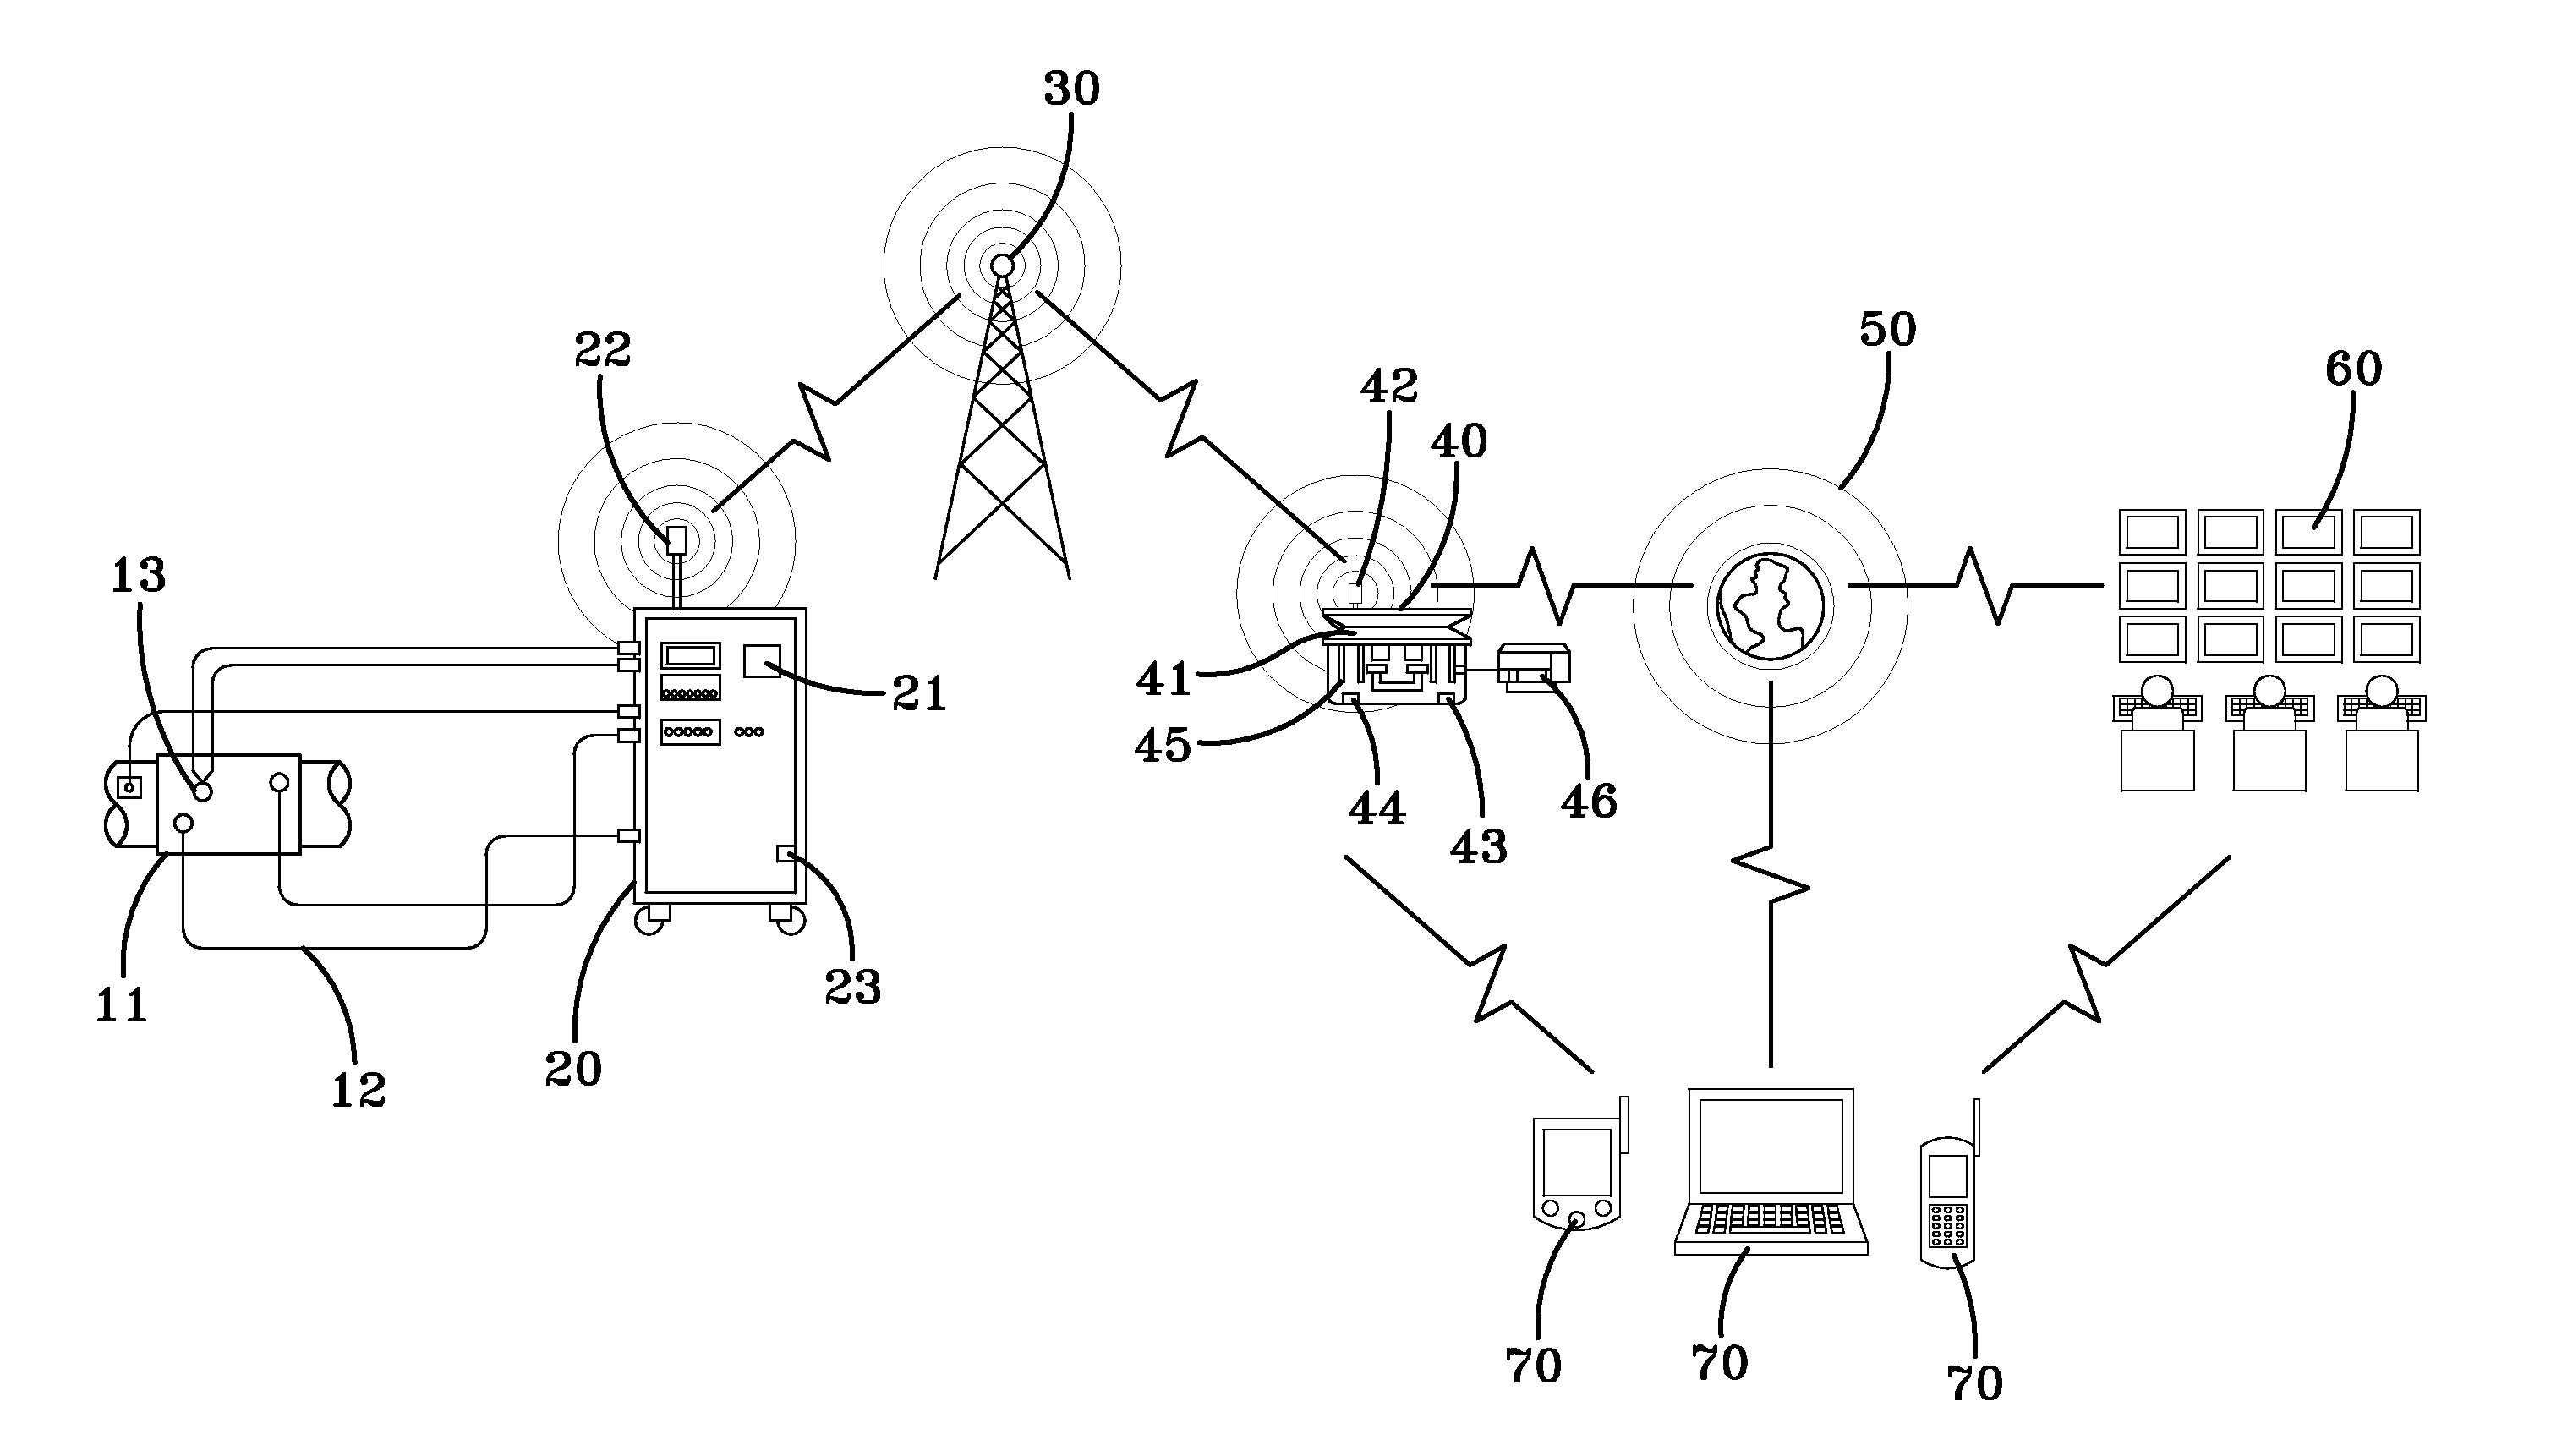 Method and apparatus for remote controlling, monitoring and/or servicing heat-treatment equipment via wireless communications